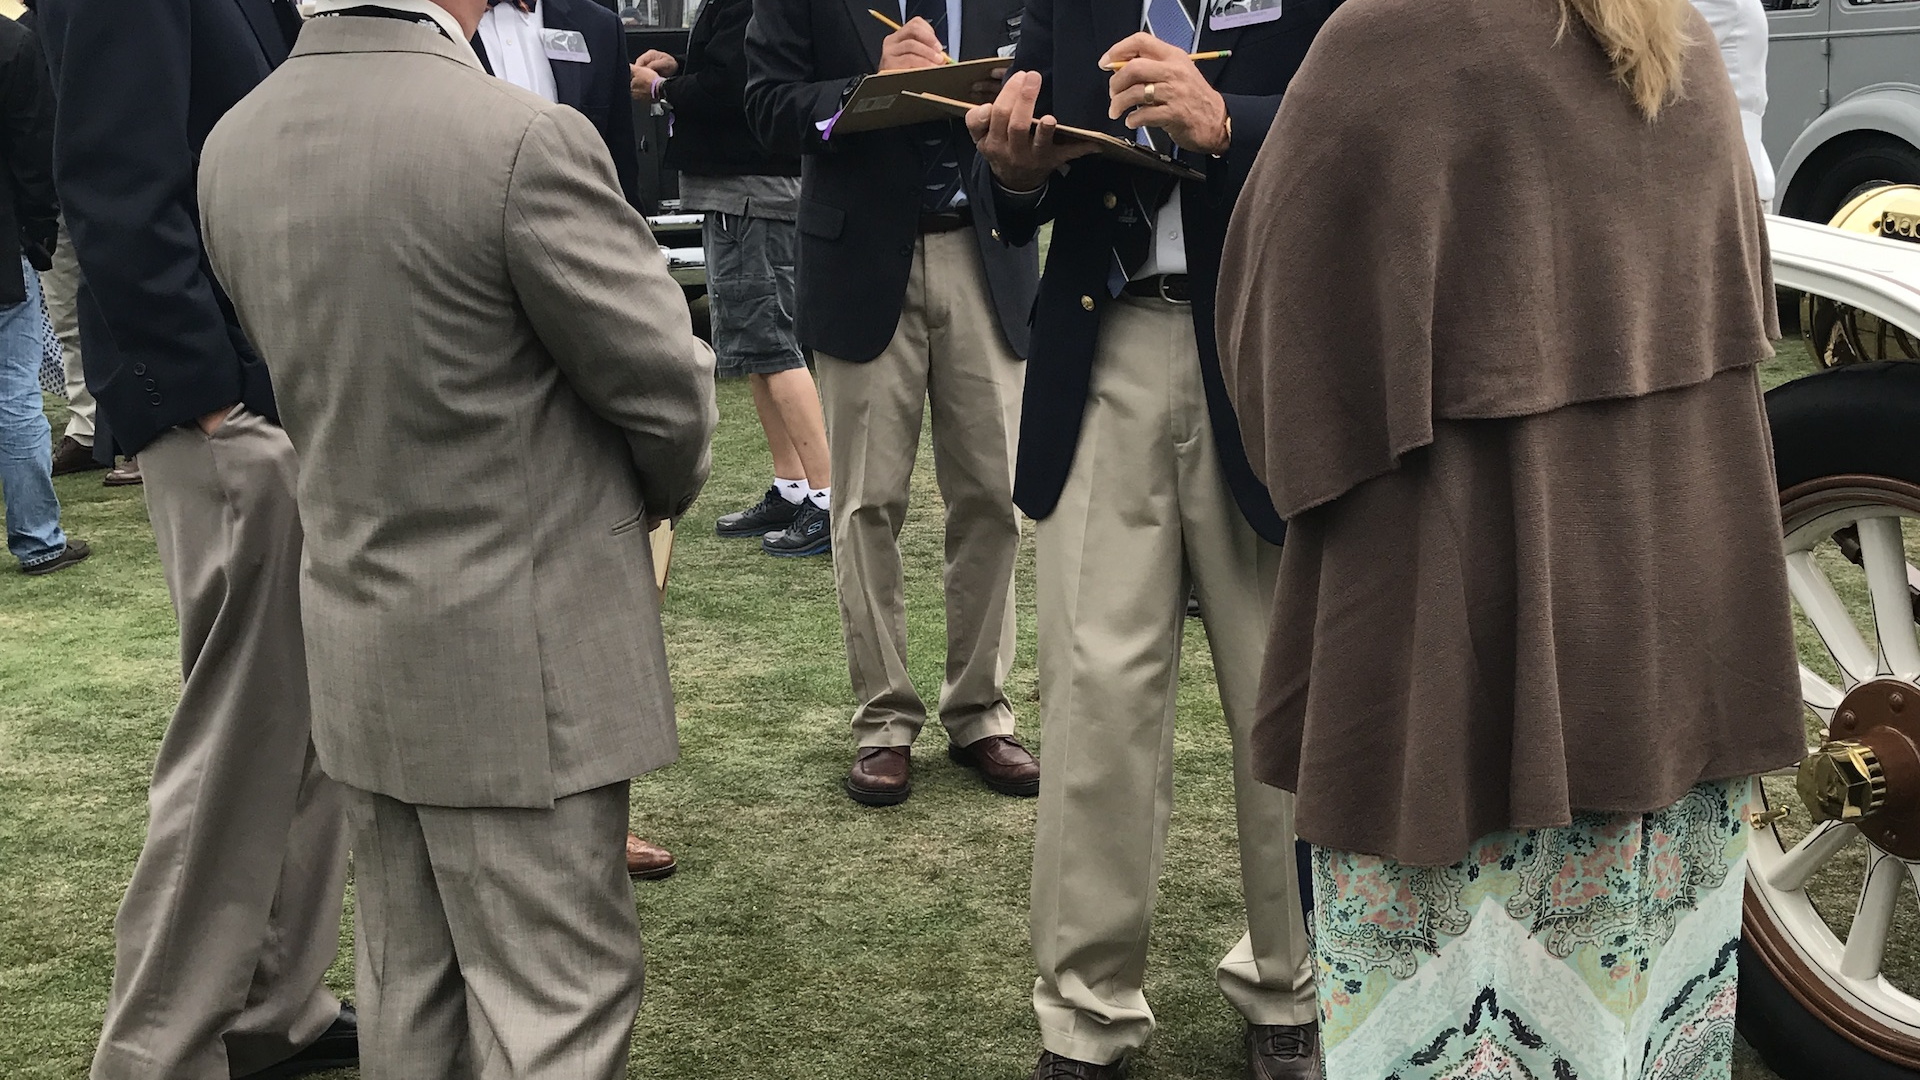 Judging at the 2017 Pebble Beach Concours d'Elegance